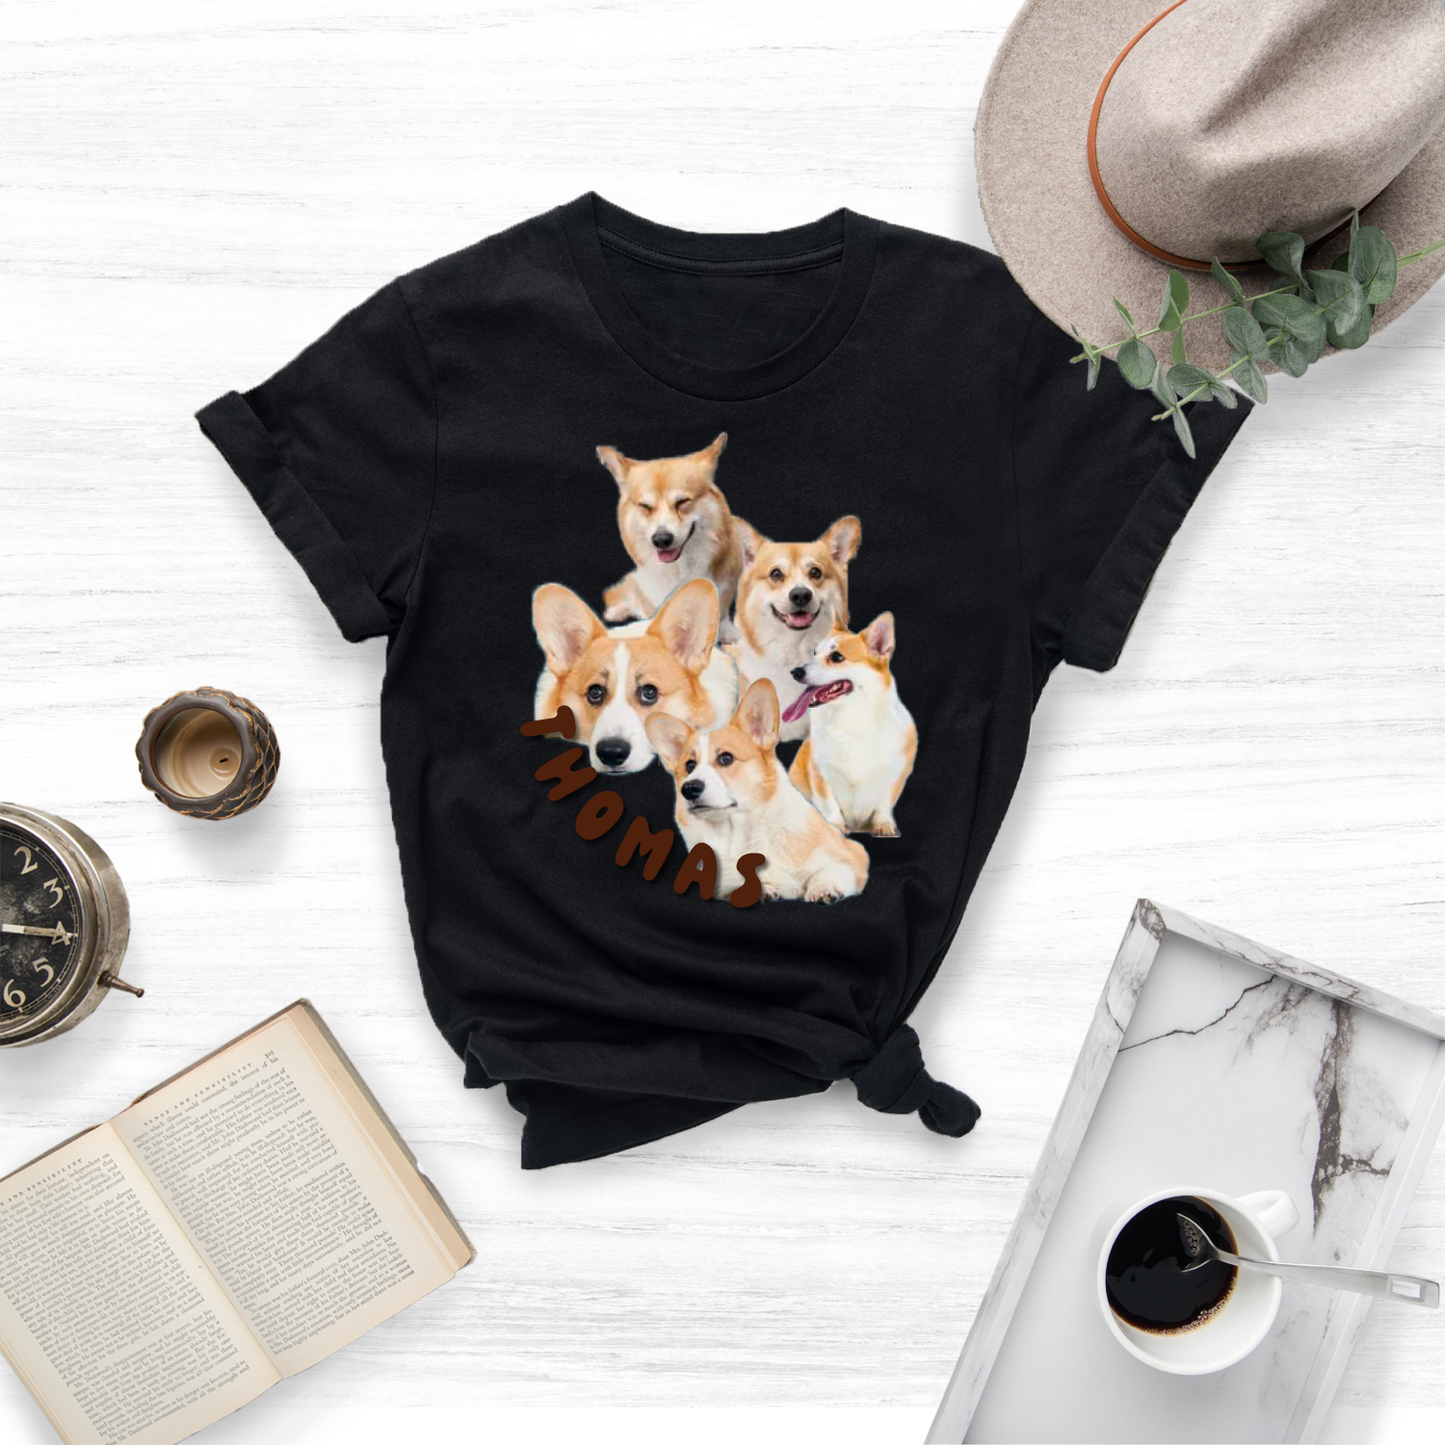 Show off your furry friend's unique personality with a personalized pet shirt.